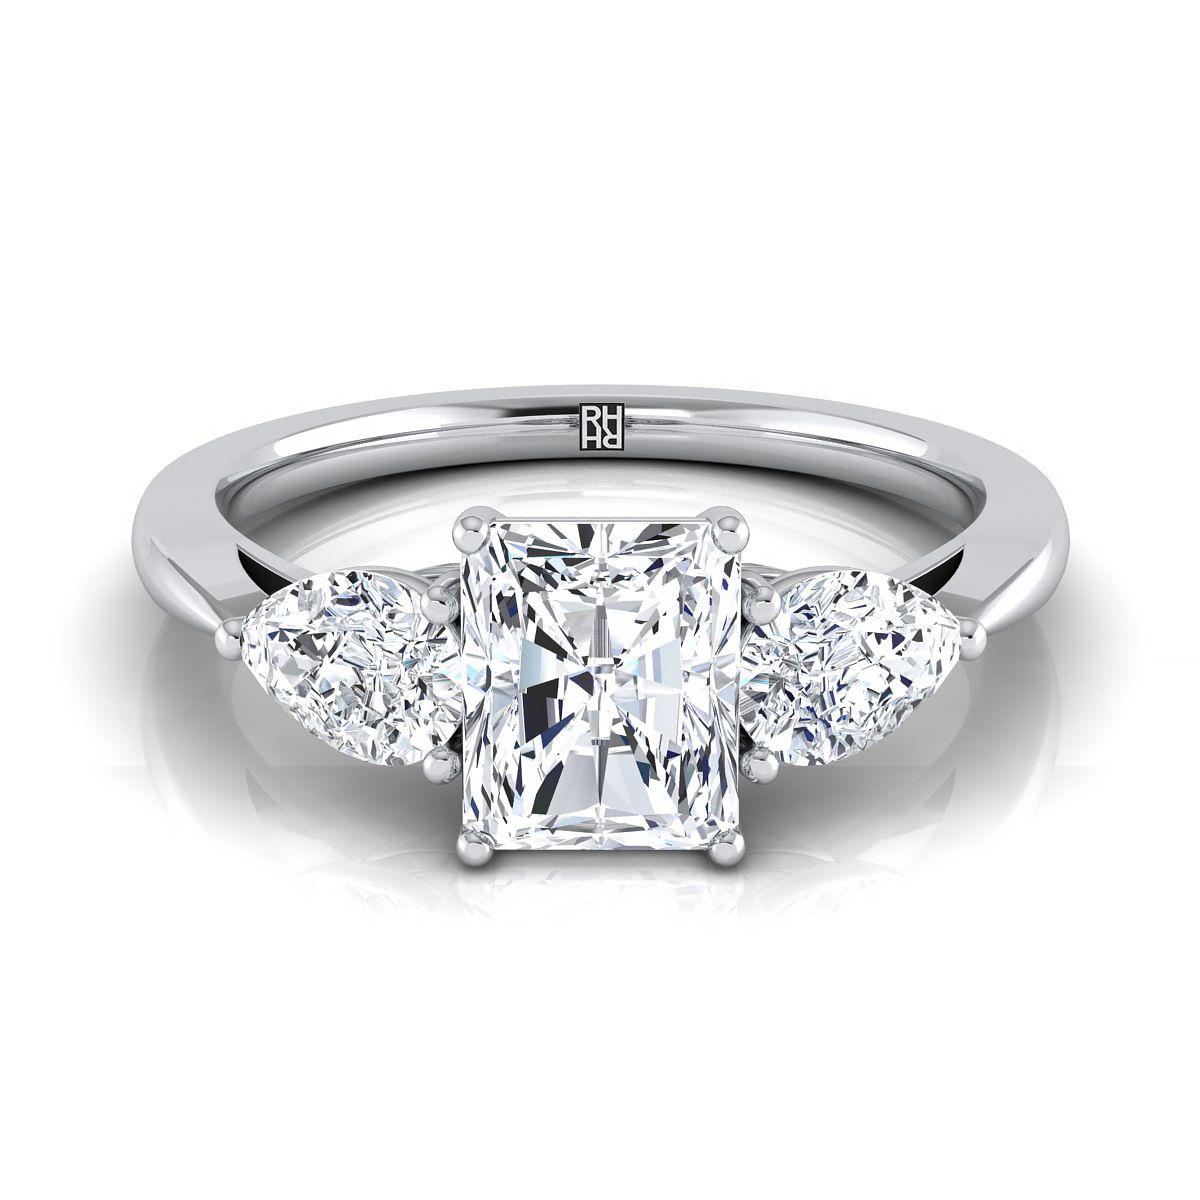 14K White Gold Radiant Cut Center Diamond Perfectly Matched Pear Shaped Three Diamond Engagement Ring -7/8ctw